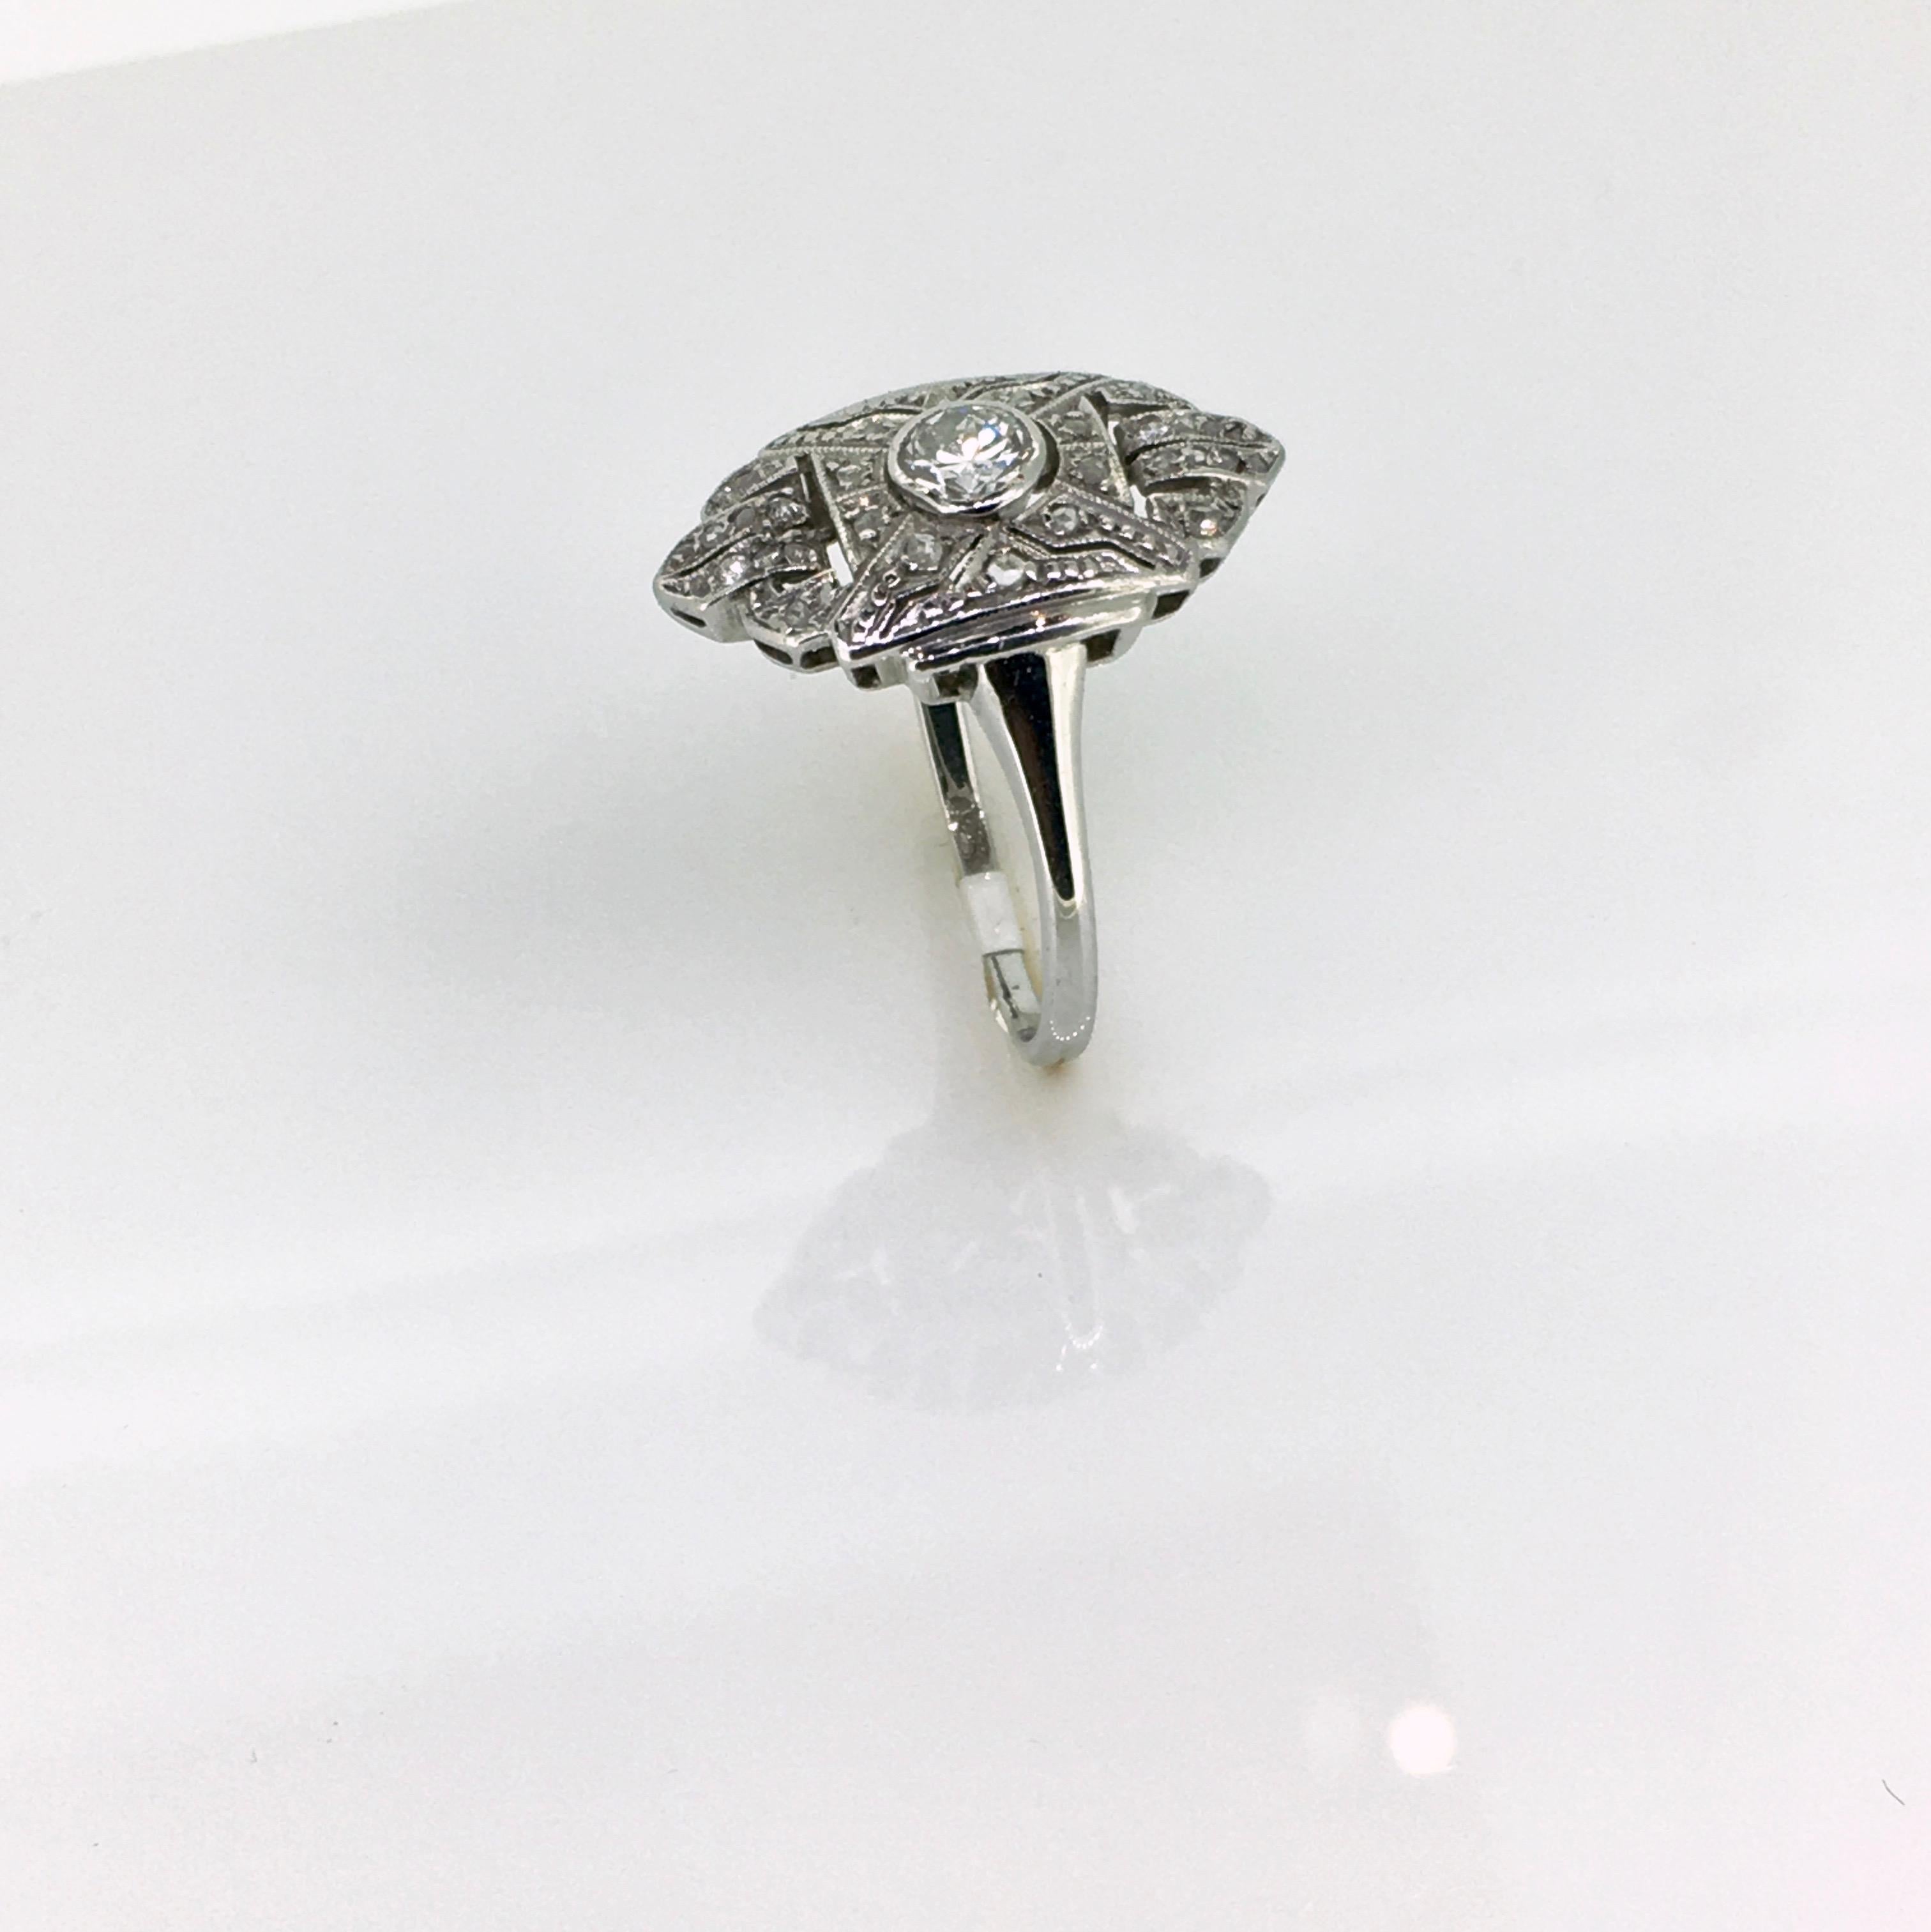 Original Art Deco ring, in 14 carat white gold, set with diamonds. Complete in original condition.
This early Art Deco ring is set with 1 centre diamond, old European cut and 30 old mine cut diamonds. 
An affordable Art Deco ring in original